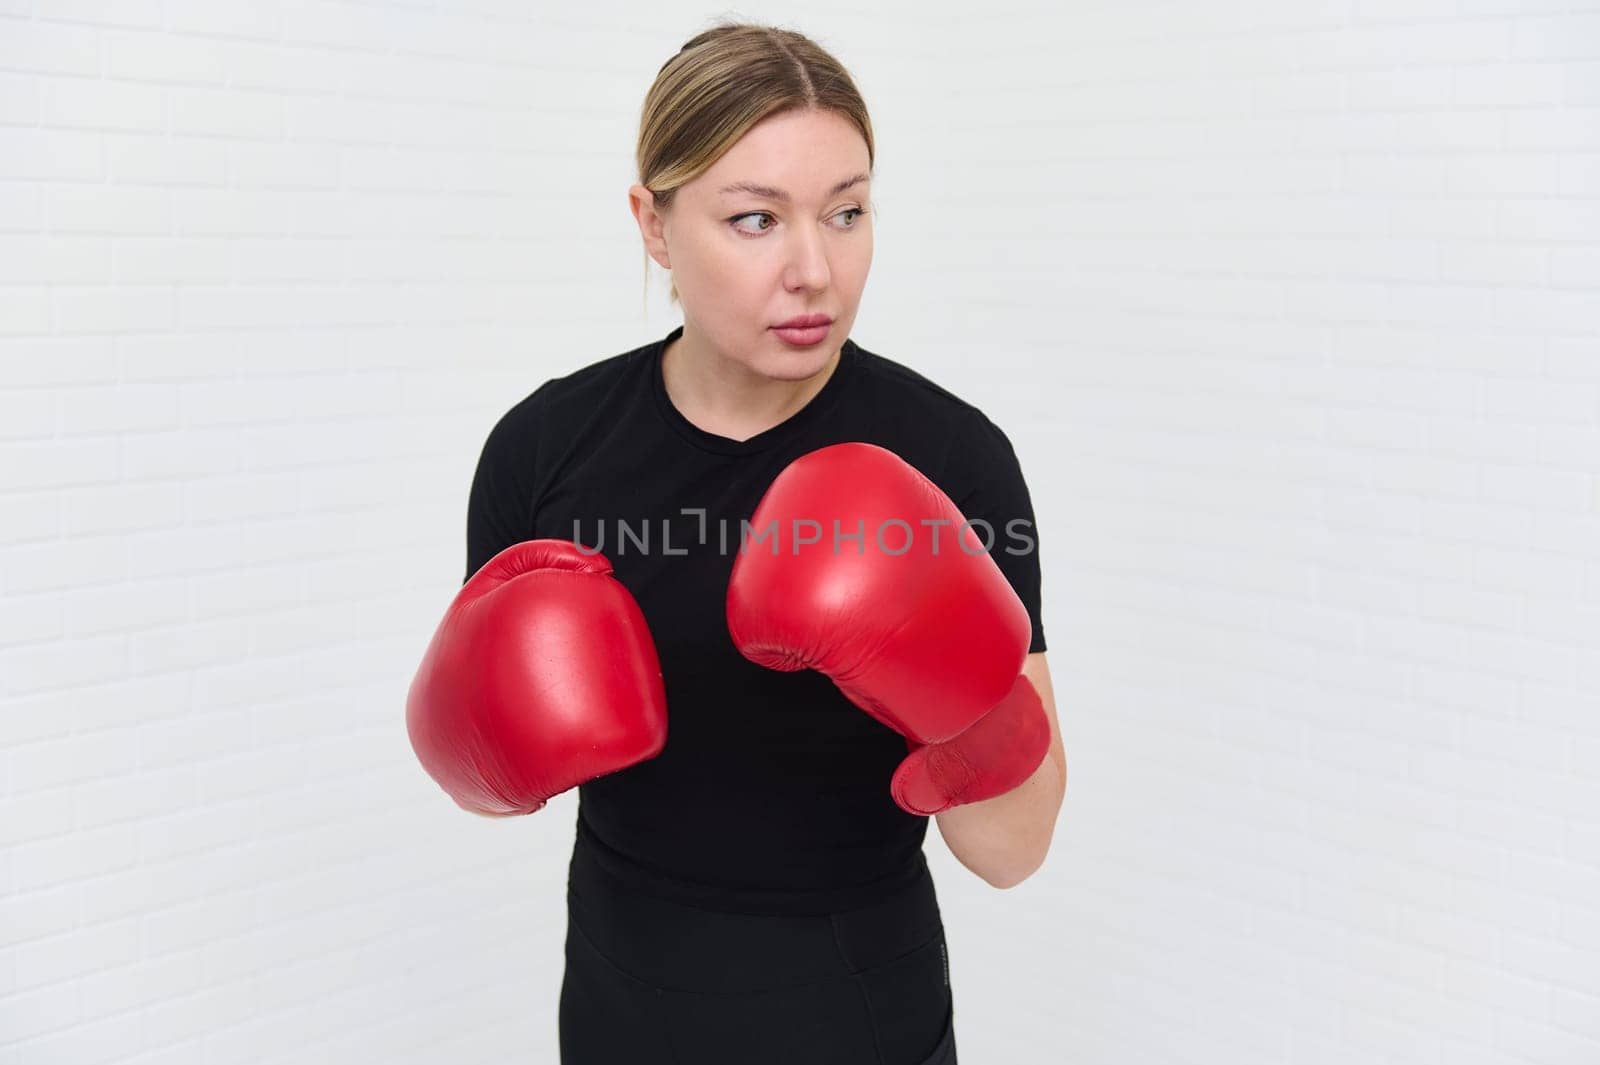 Authentic portrait of European female boxer with red boxing gloves, looking aside, isolated over white background with copy space. Pretty woman exercising during box workout indoors